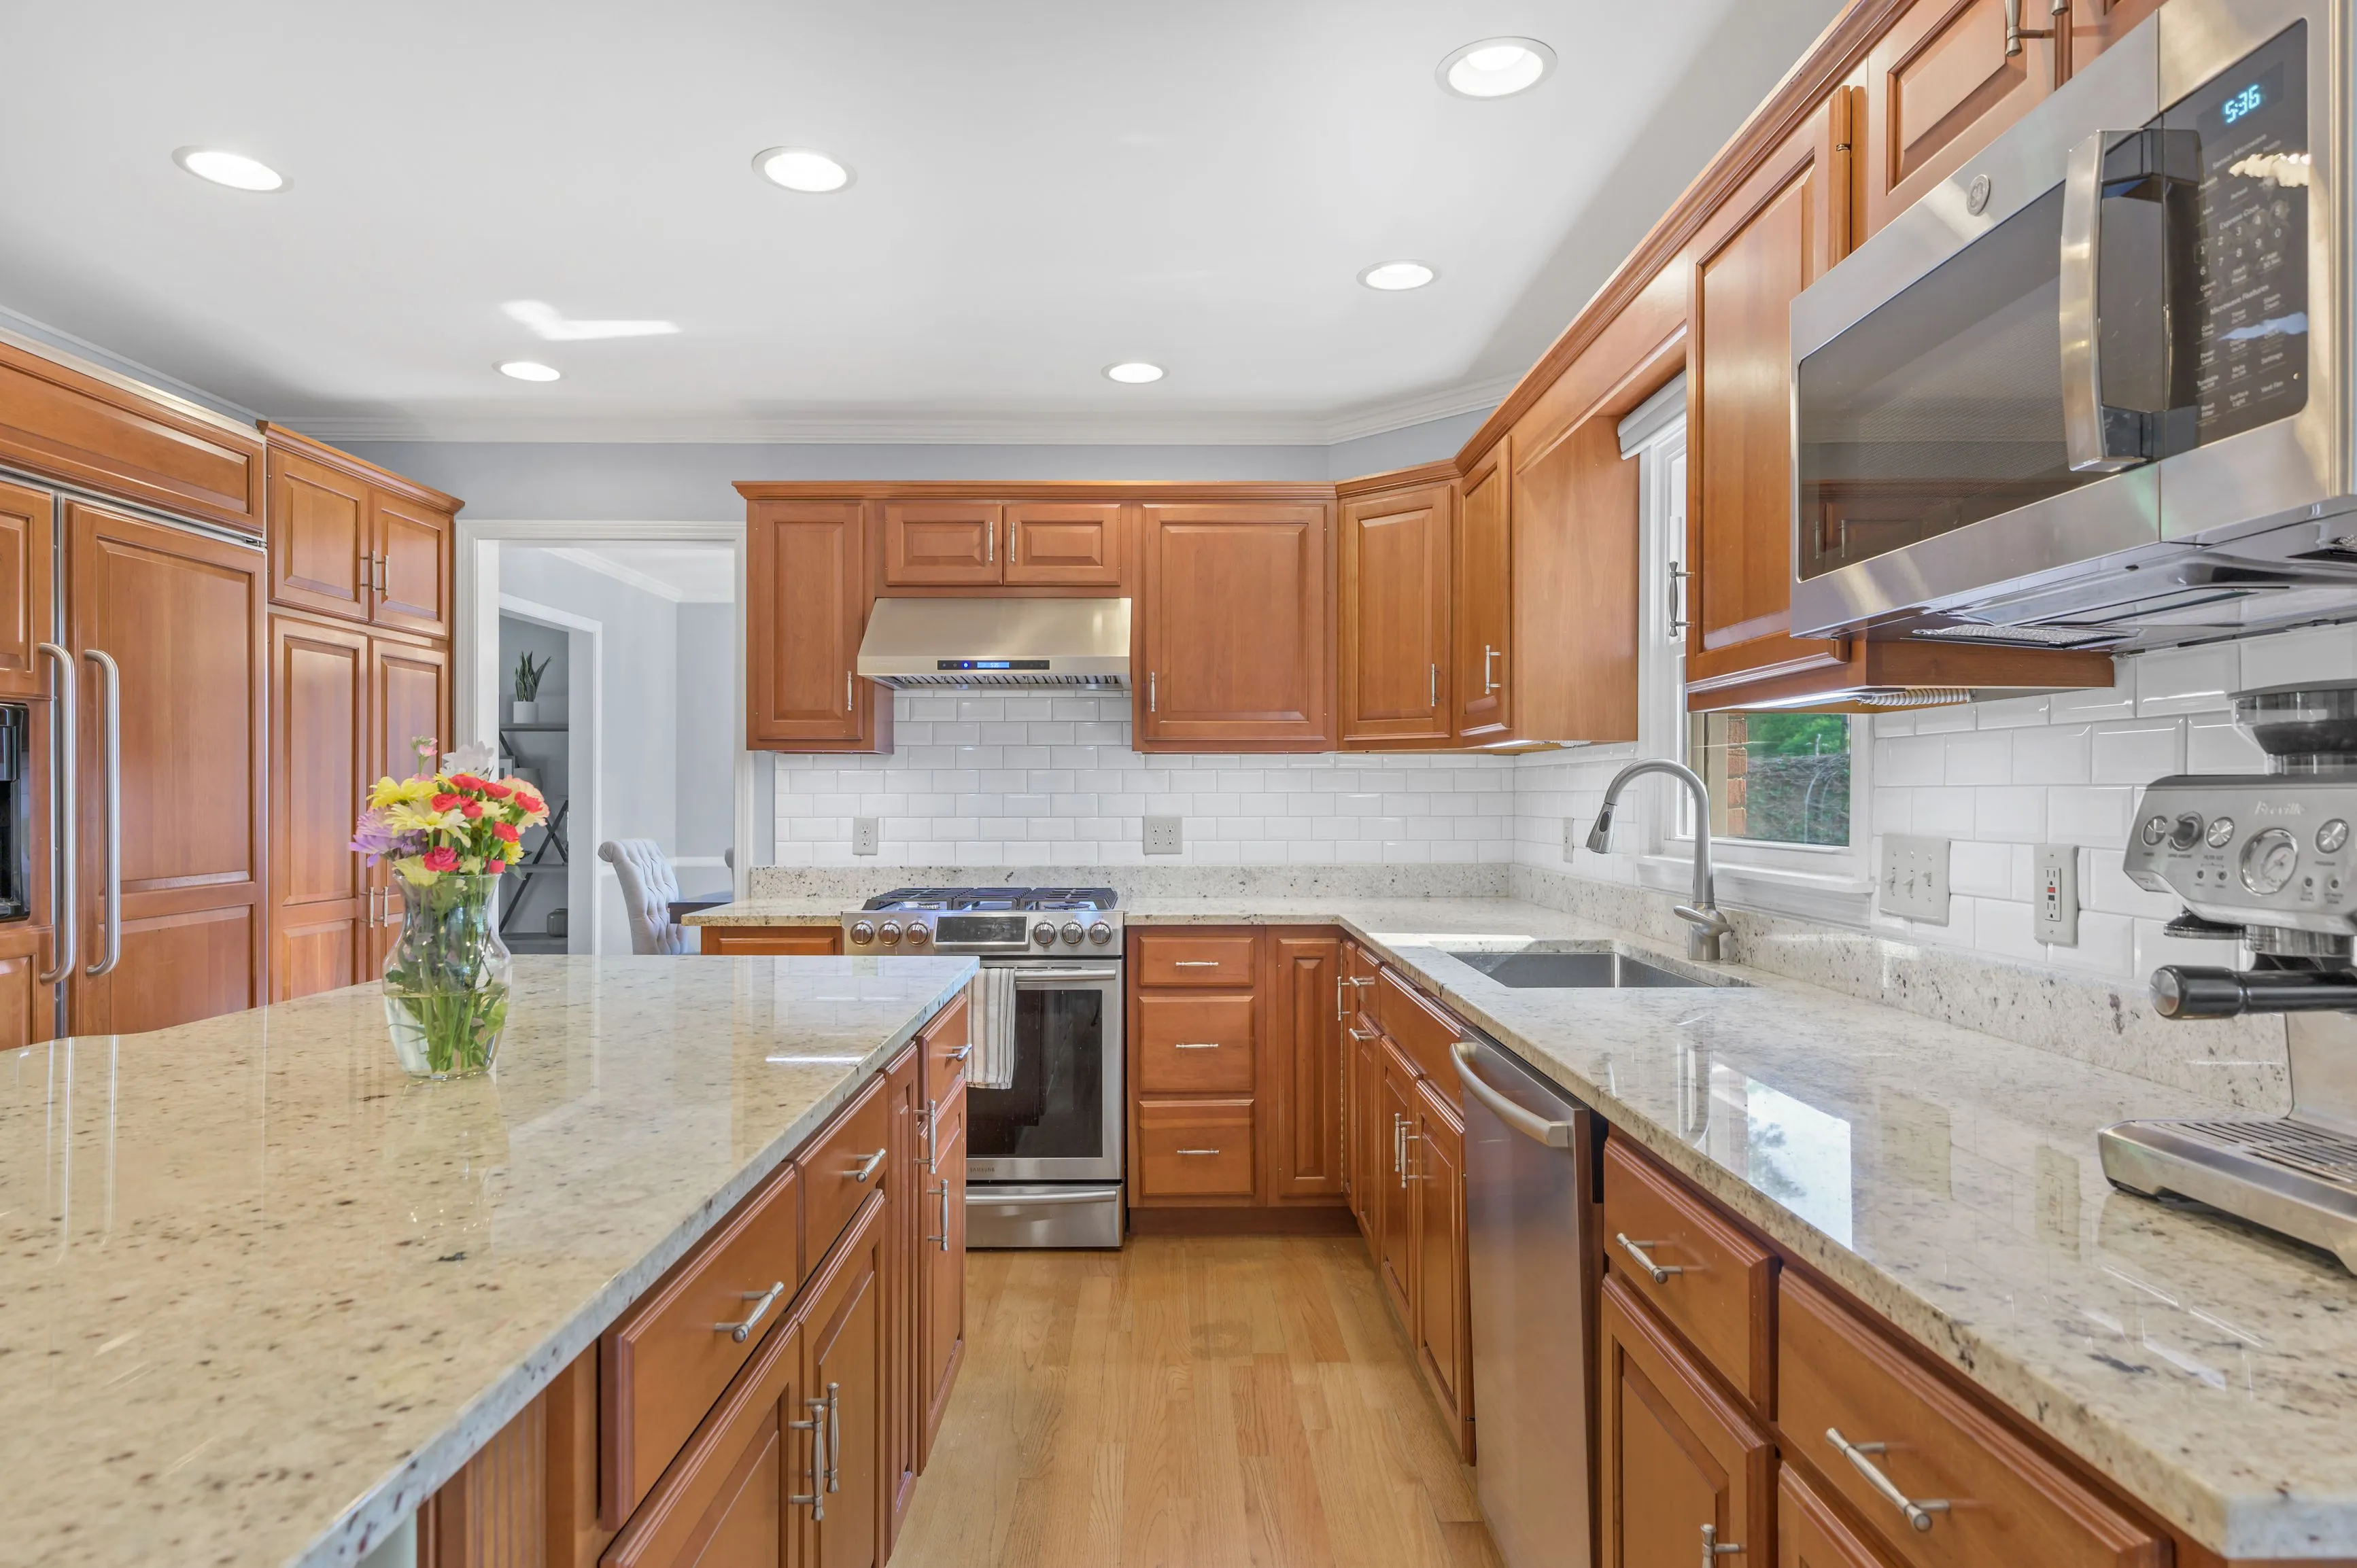 Spacious kitchen interior with wooden cabinets, granite countertops and modern stainless steel appliances.